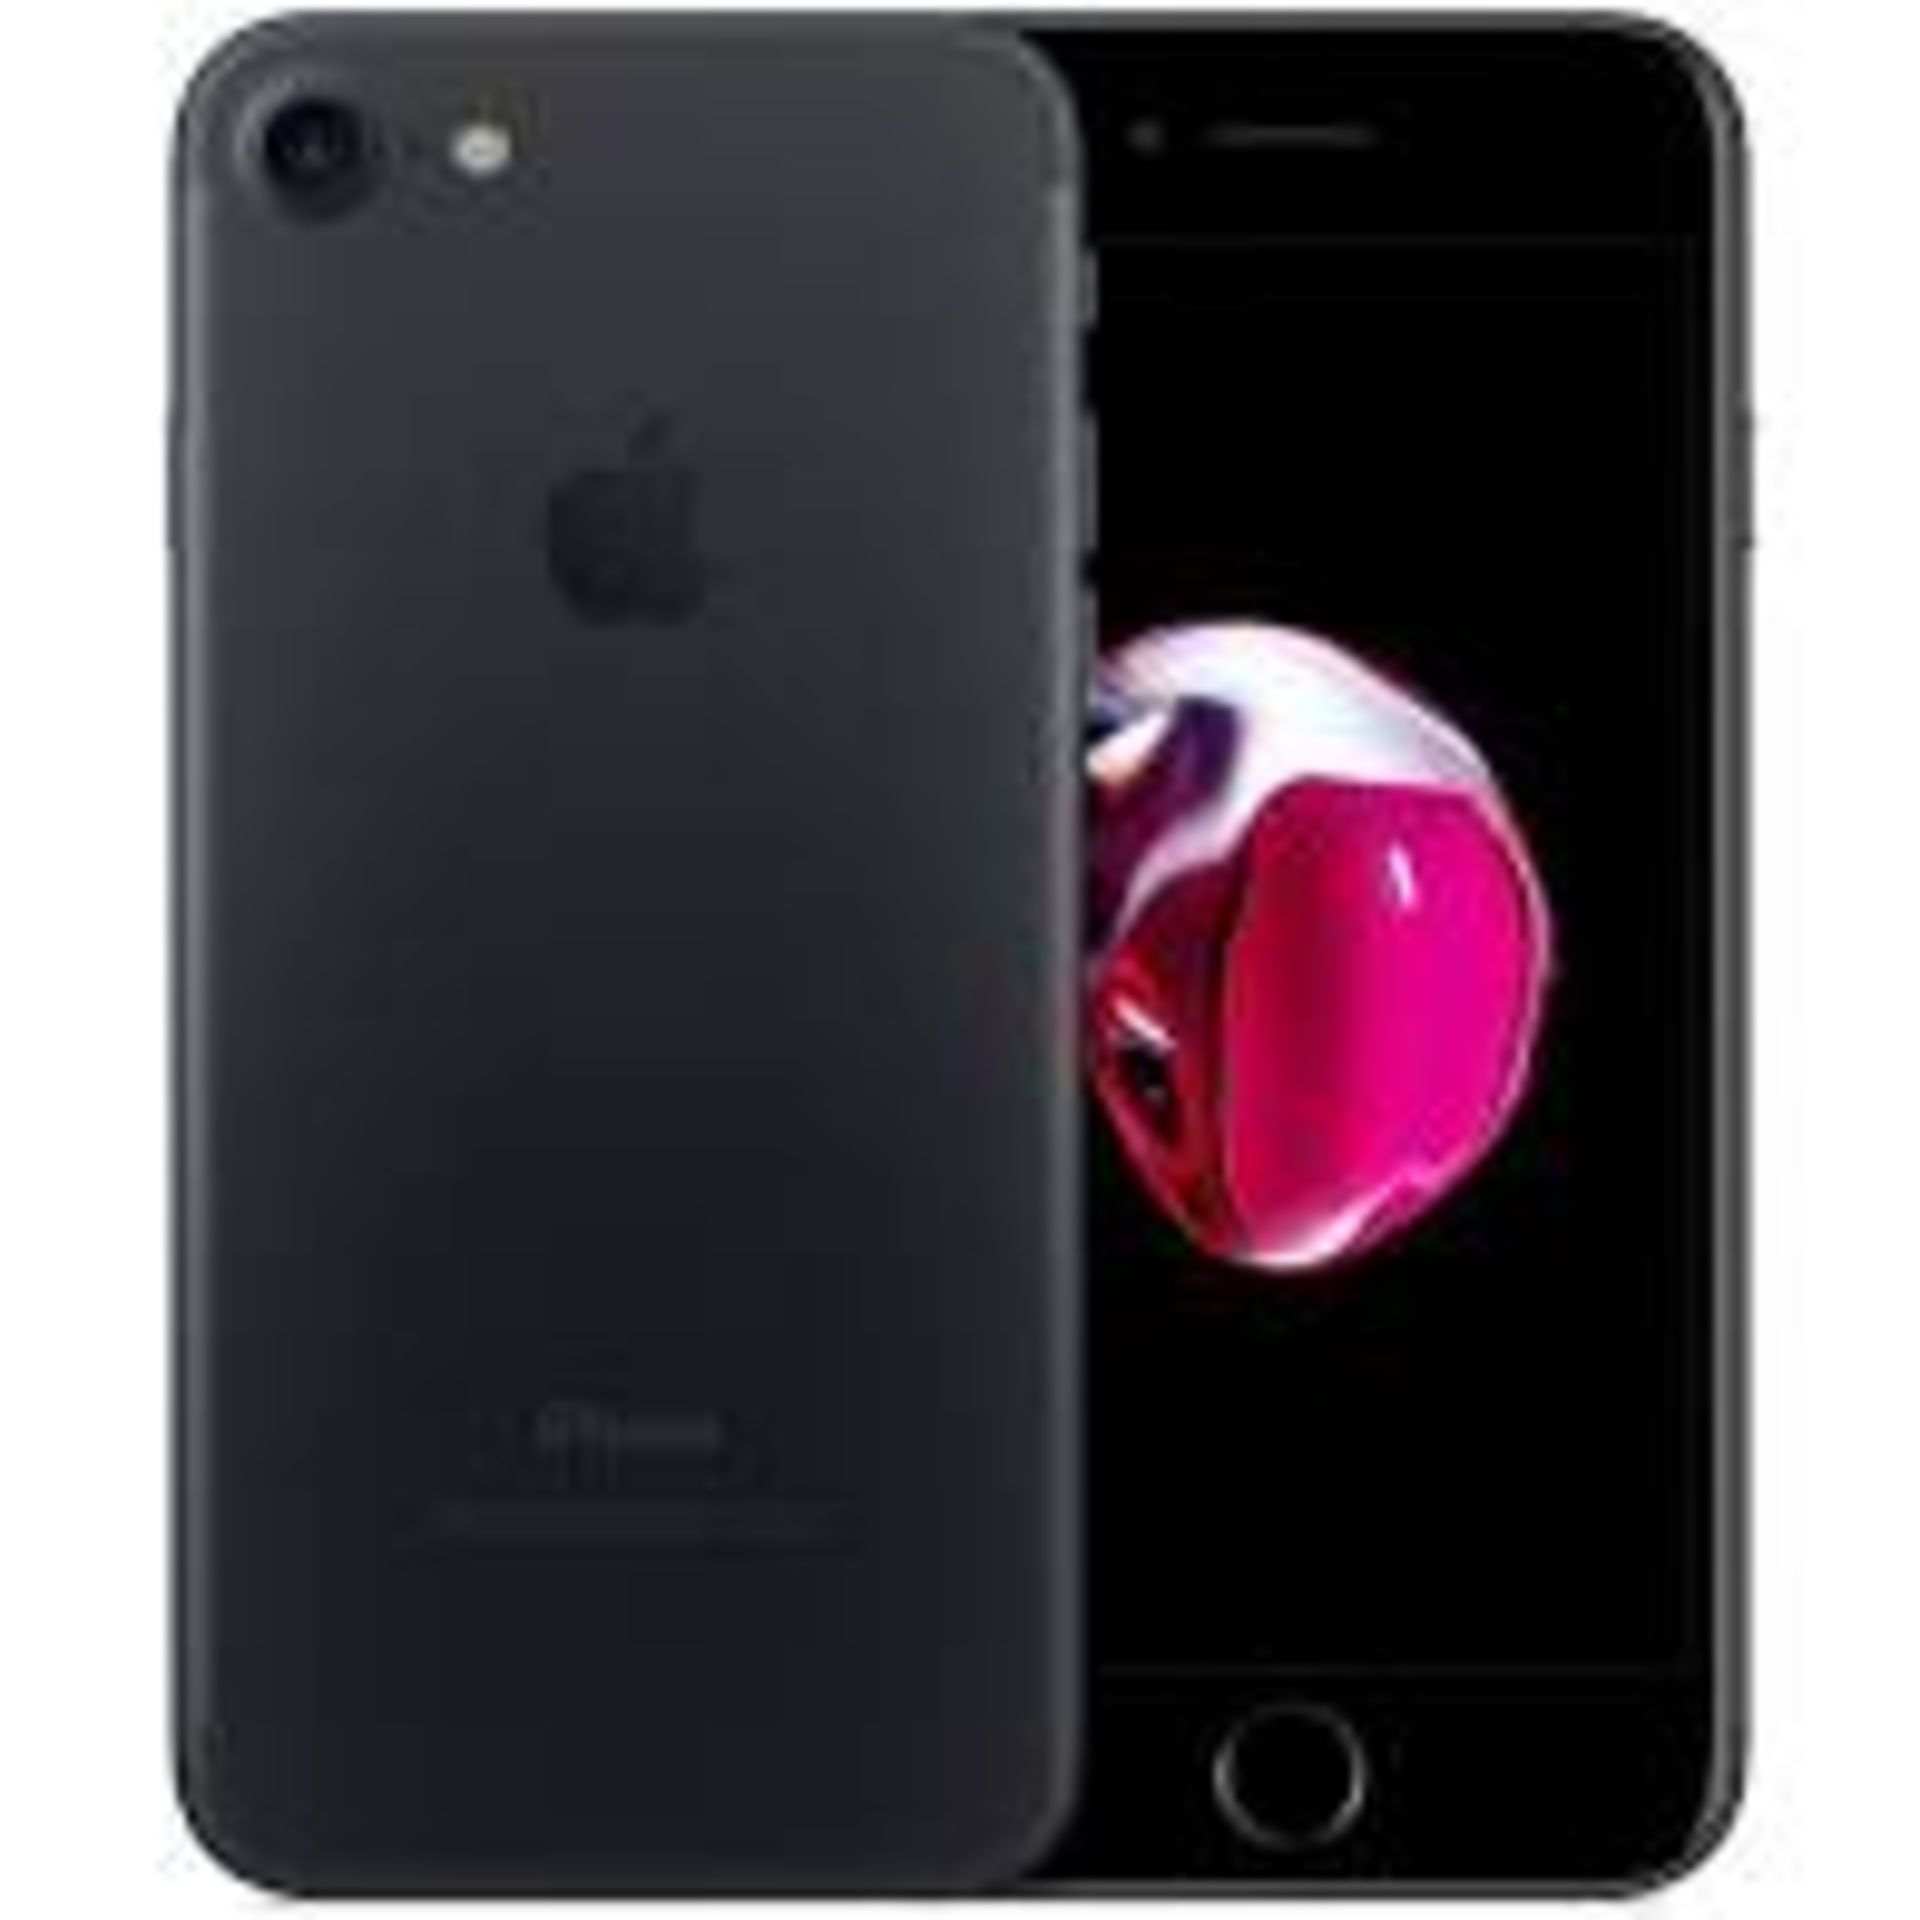 Apple iPhone 7 128GB Black. RRP £430 - Grade A - Perfect Working Condition - (Fully refurbished